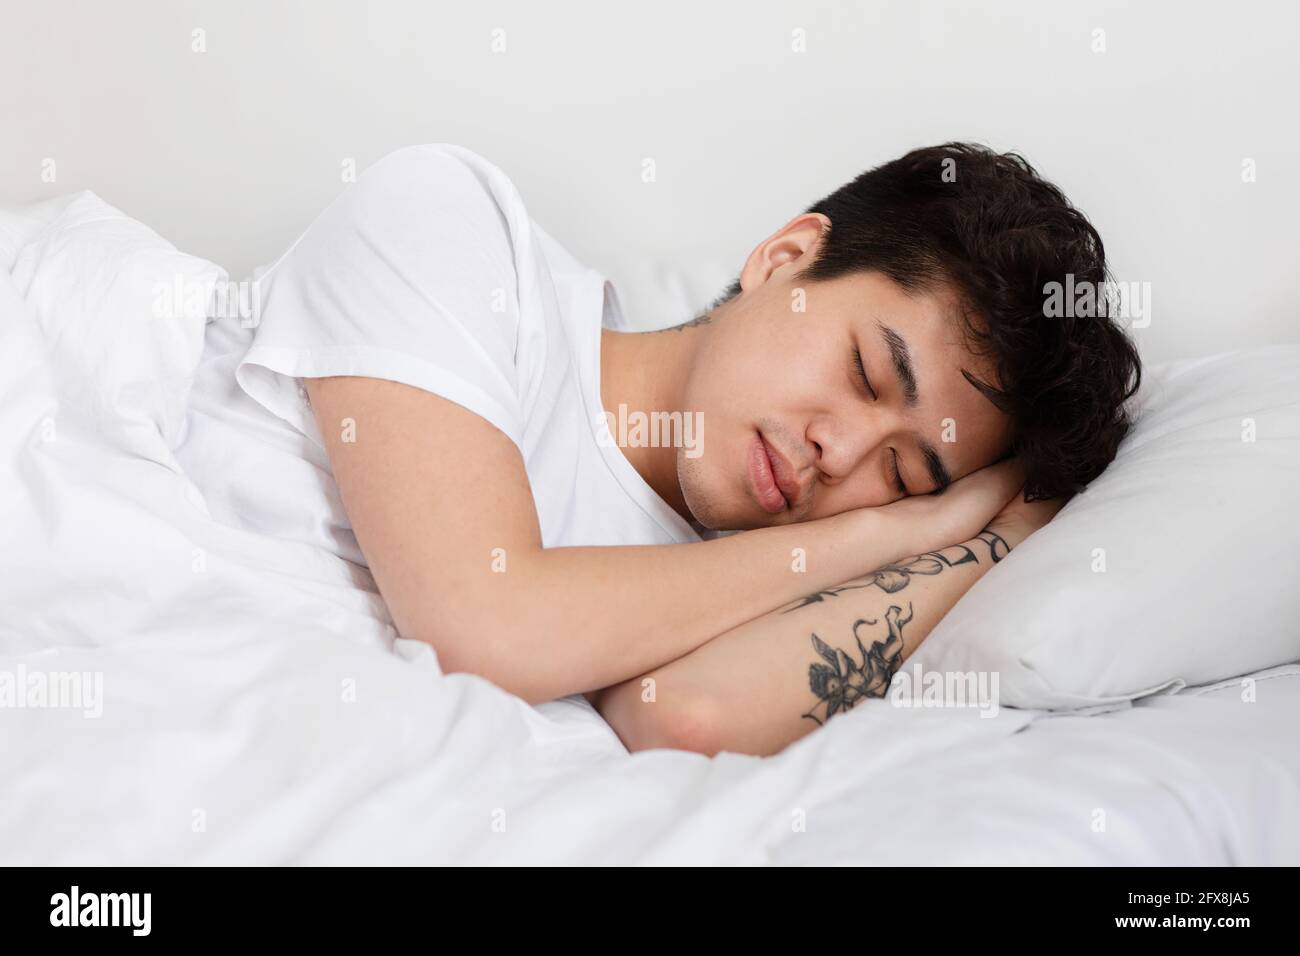 Weekend, free time, rest and relaxation at home. Good morning during covid-19 outbreak, self-isolation Stock Photo